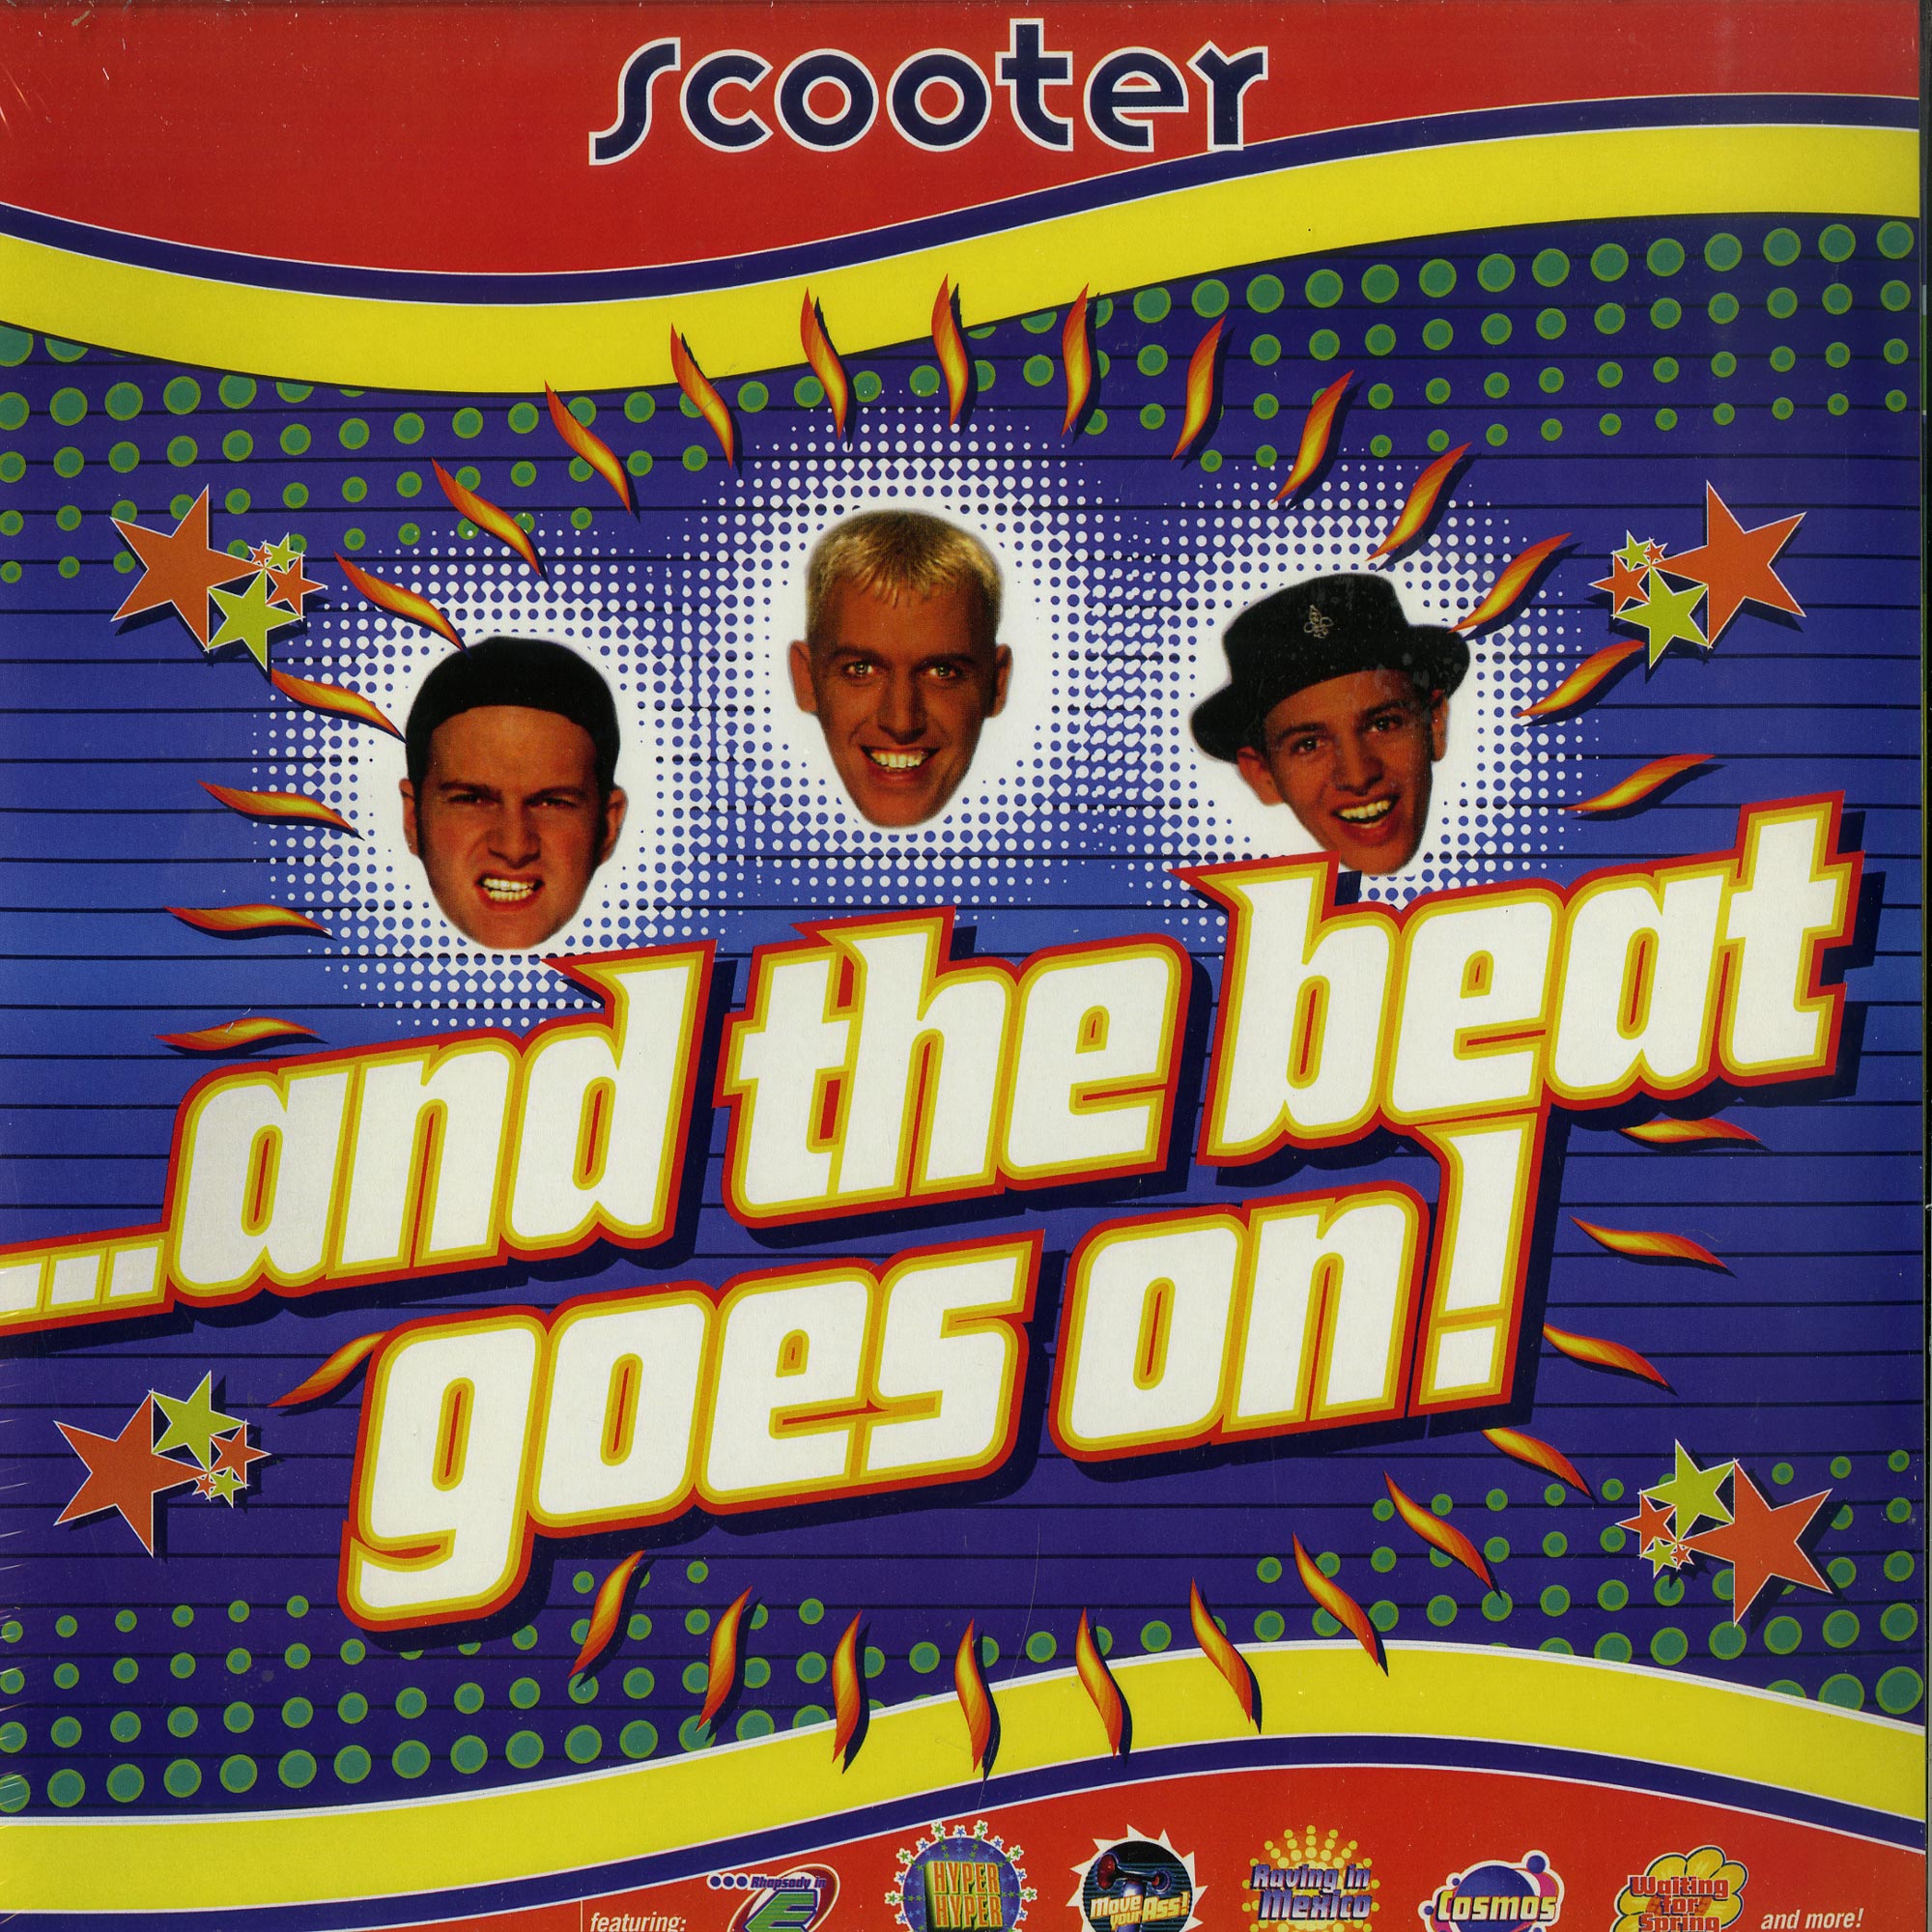 And the beat goes on. Scooter группа 1995. Scooter and the Beat goes on. Scooter and the Beat goes on 1995. Scooter винил.